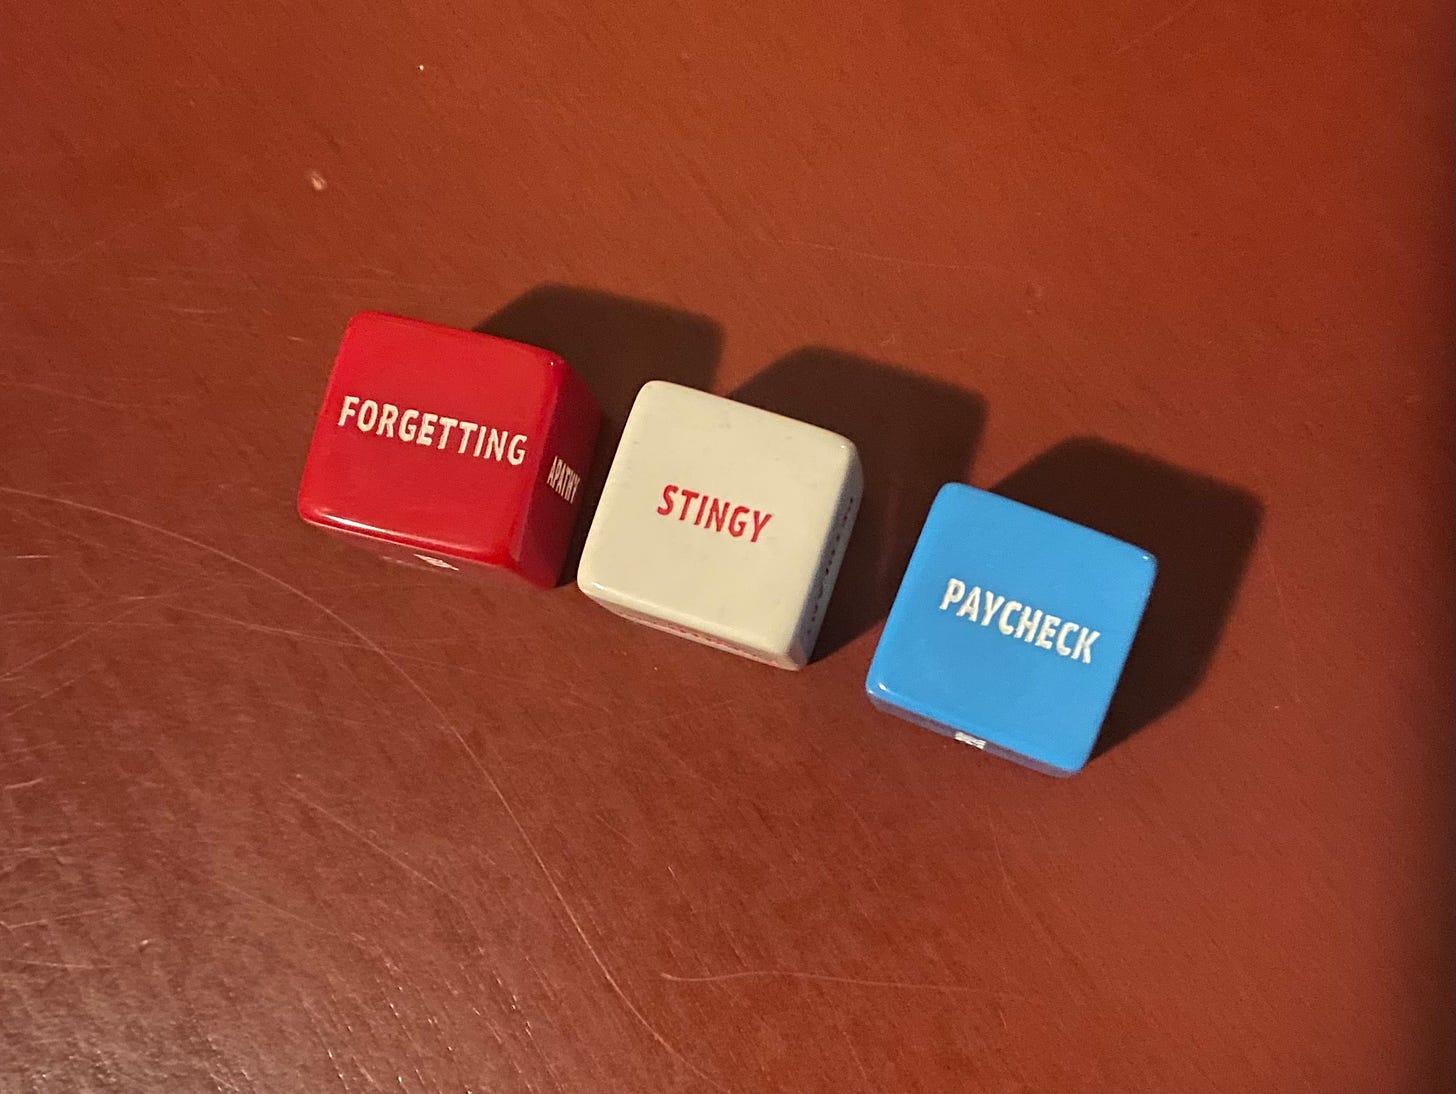 Red dice that says FORGETTING, a white dice that says "STINGY," and a blue dice that says "PAYCHECK"